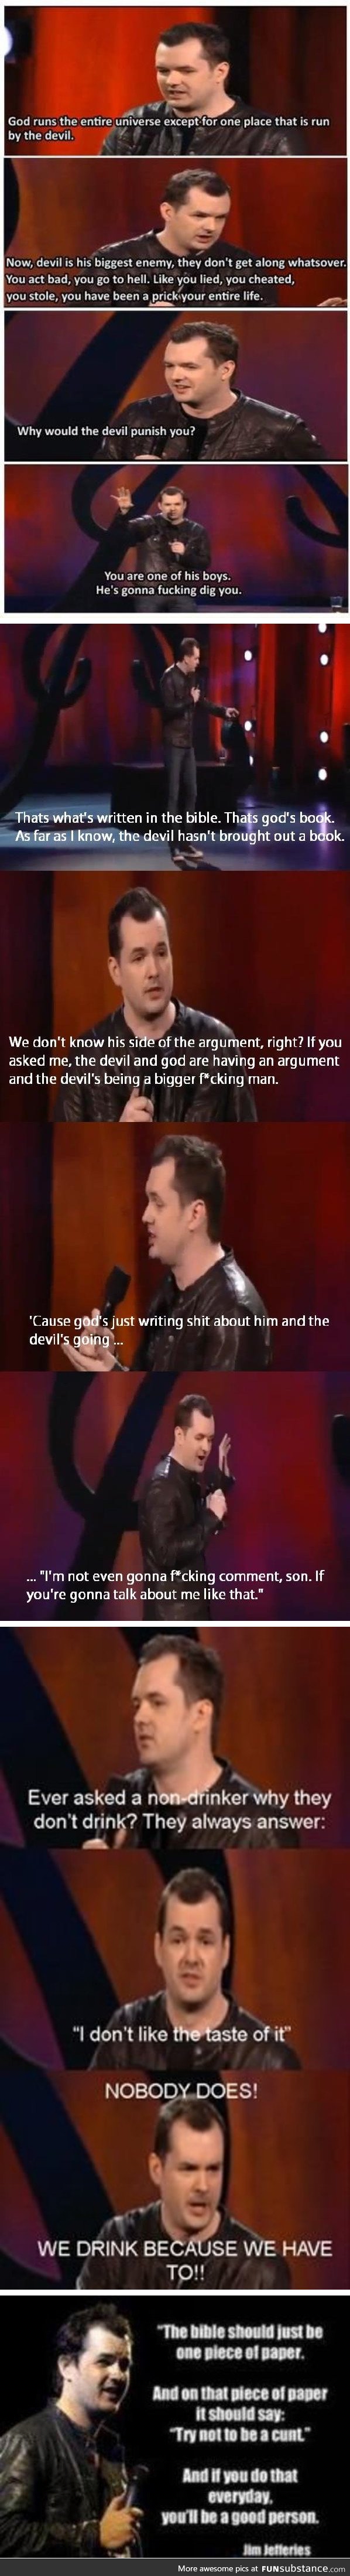 A comedian's take on Bible